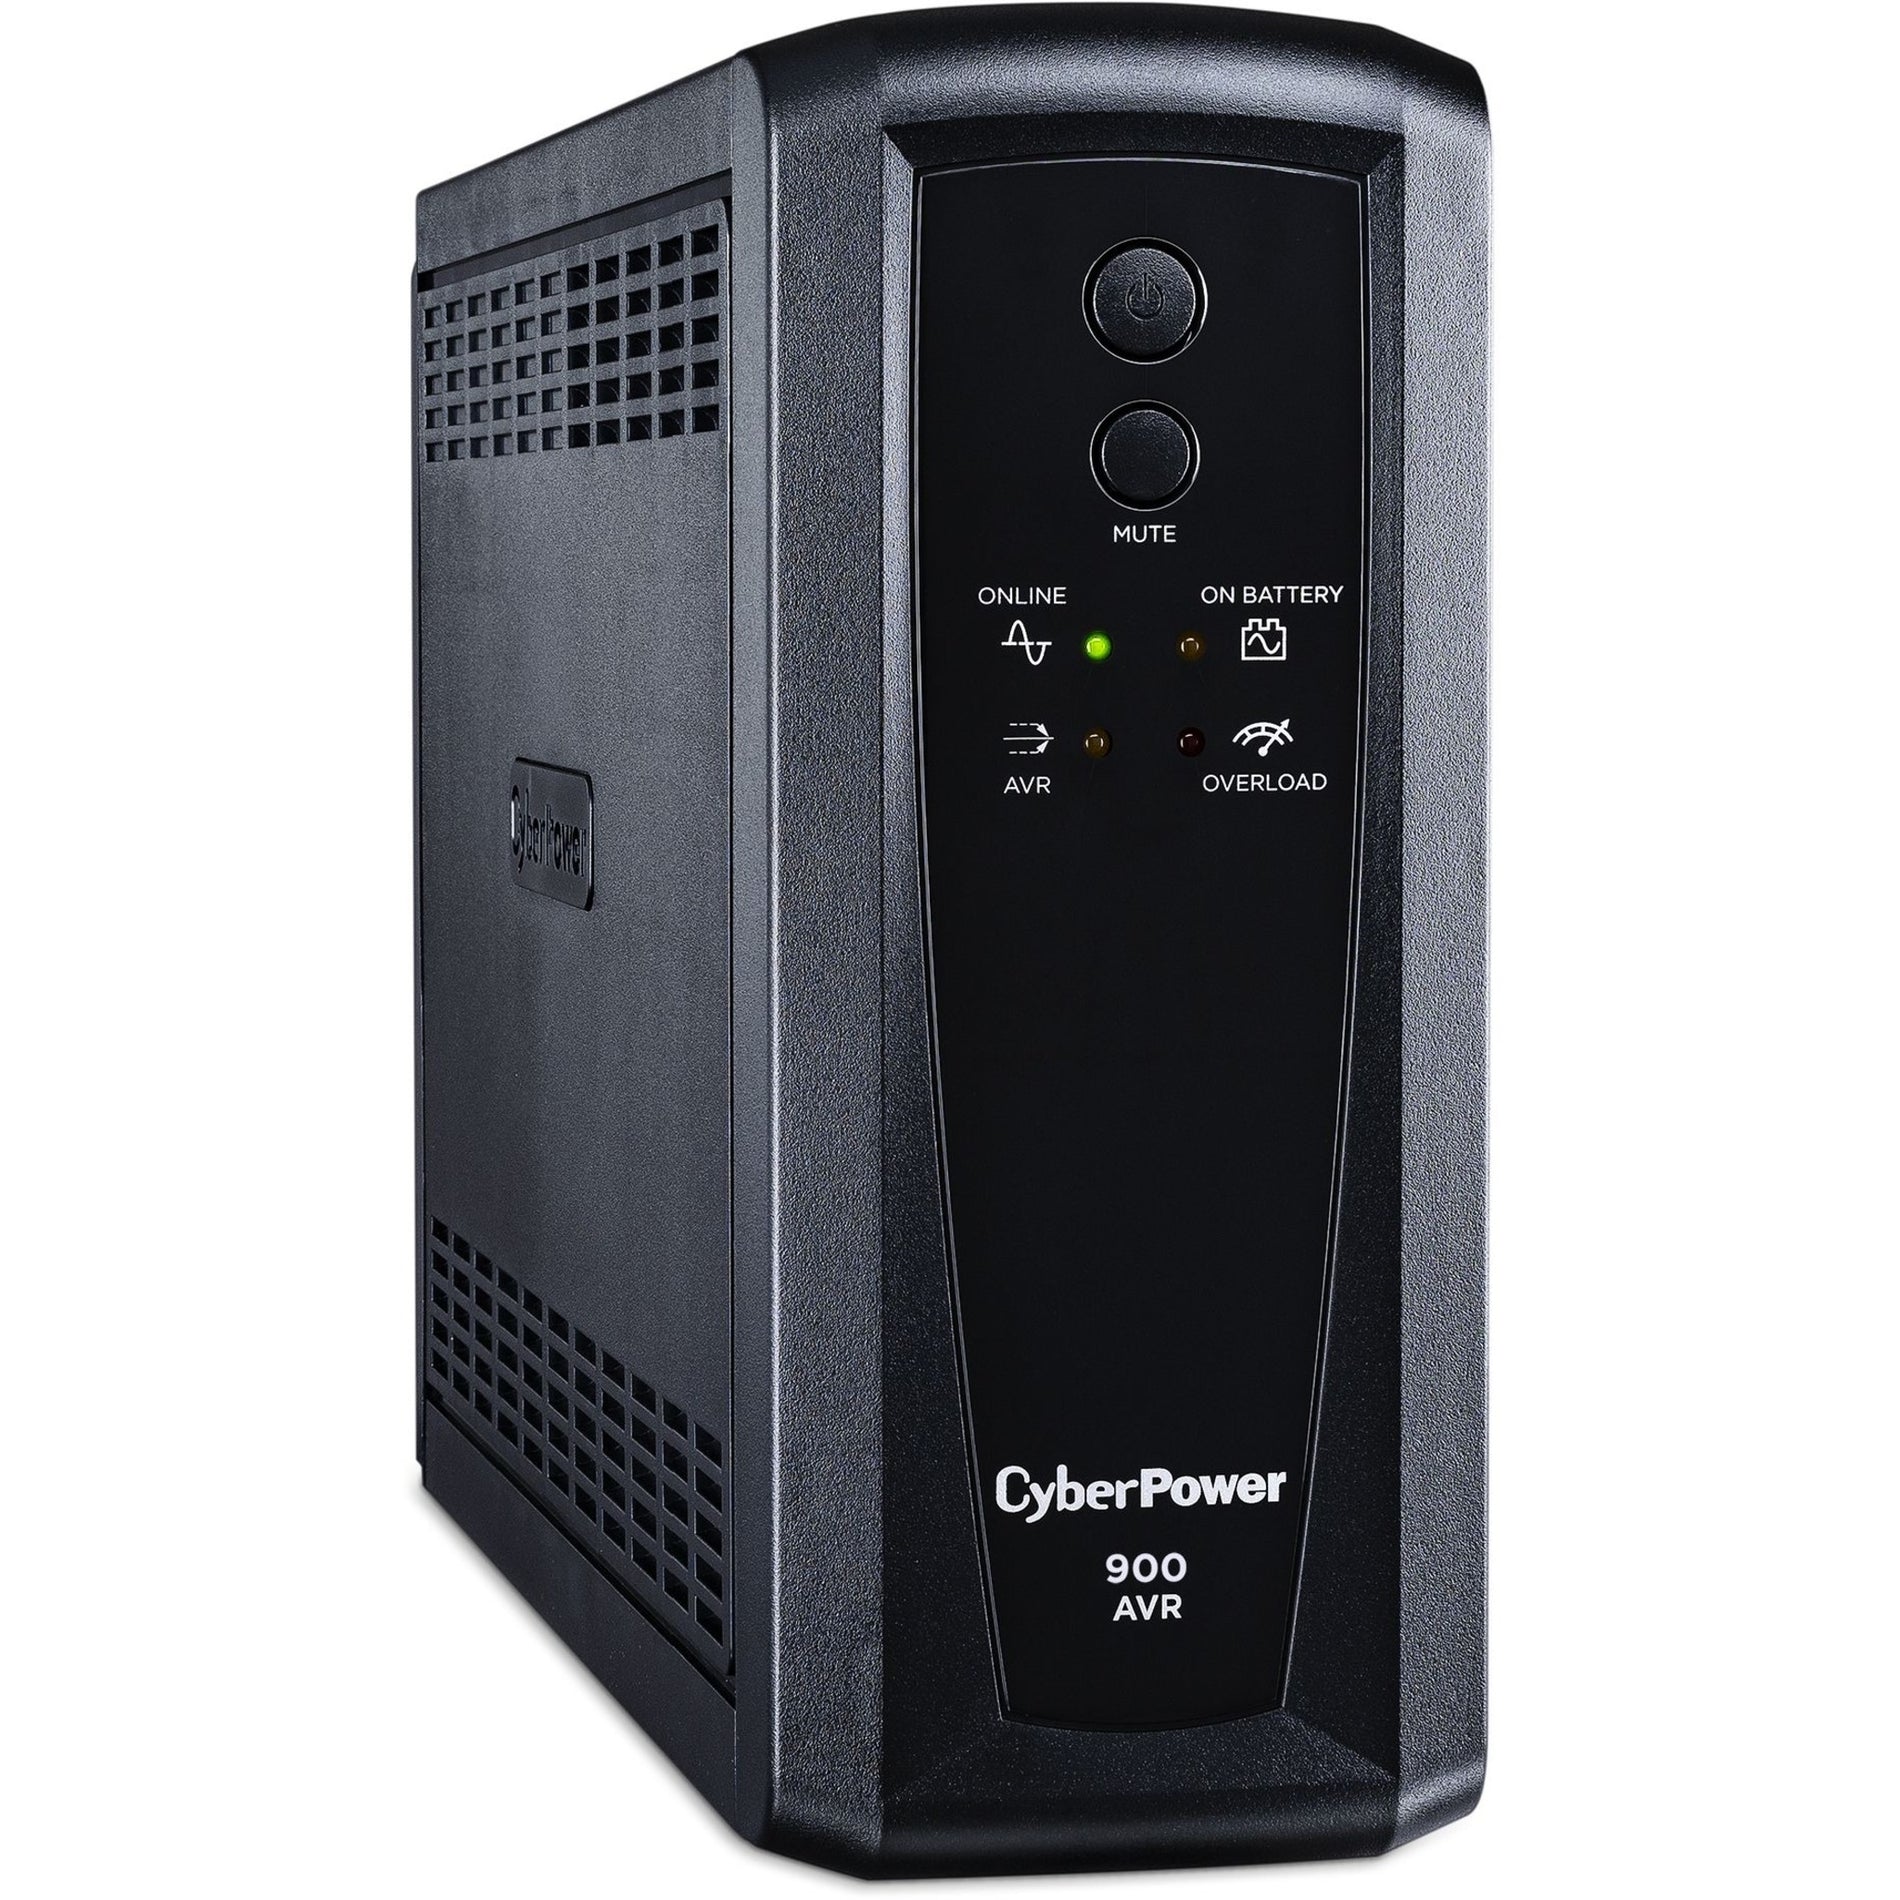 CyberPower CP900AVR AVR UPS Systems CP900AVR 900VA UPS, 3-Year Warranty, Energy Star, USB and Serial Port, Simulated Sine Wave, 120V AC